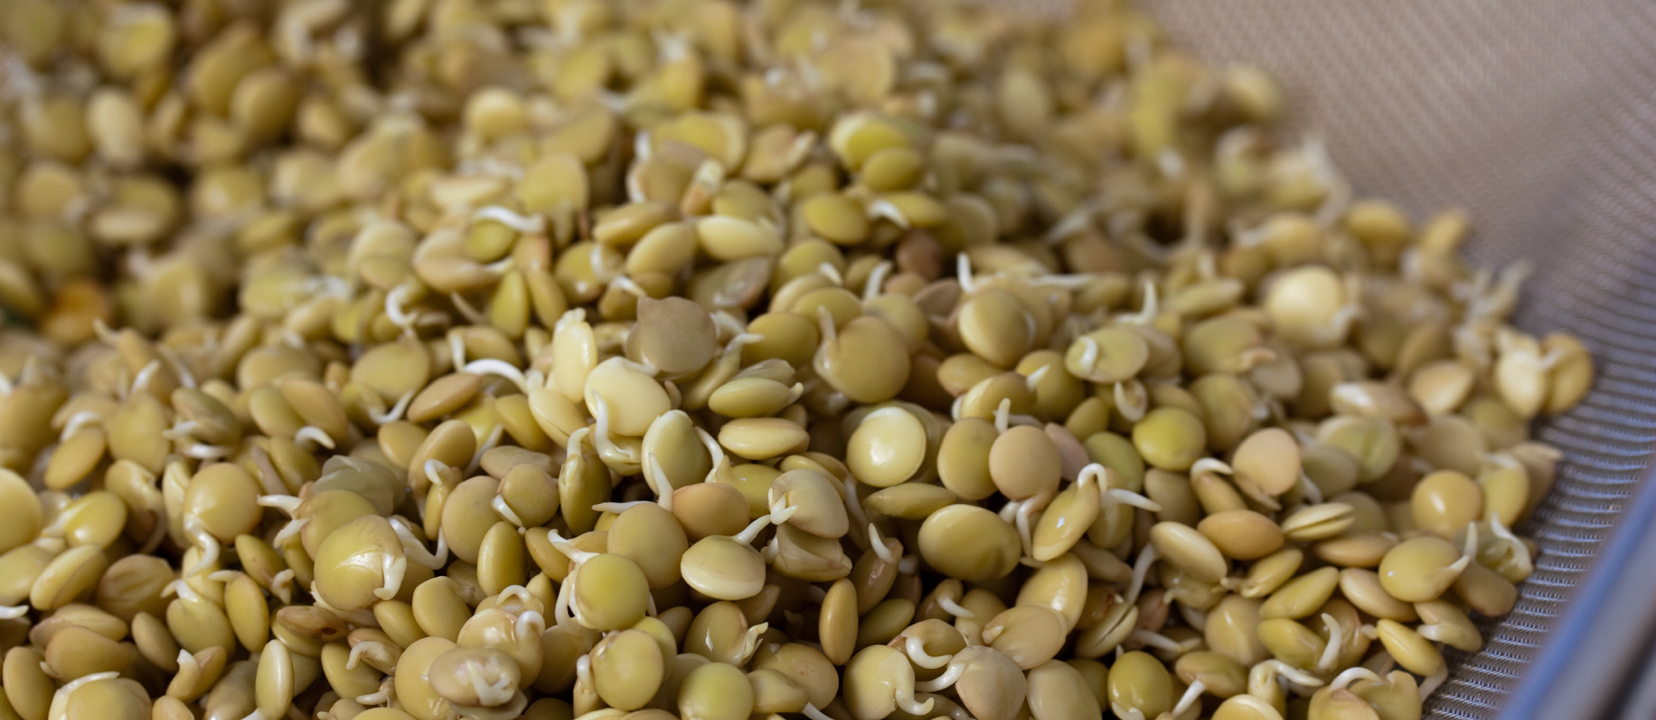 Are Sprouted Lentils Healthier Than Canned Lentils?